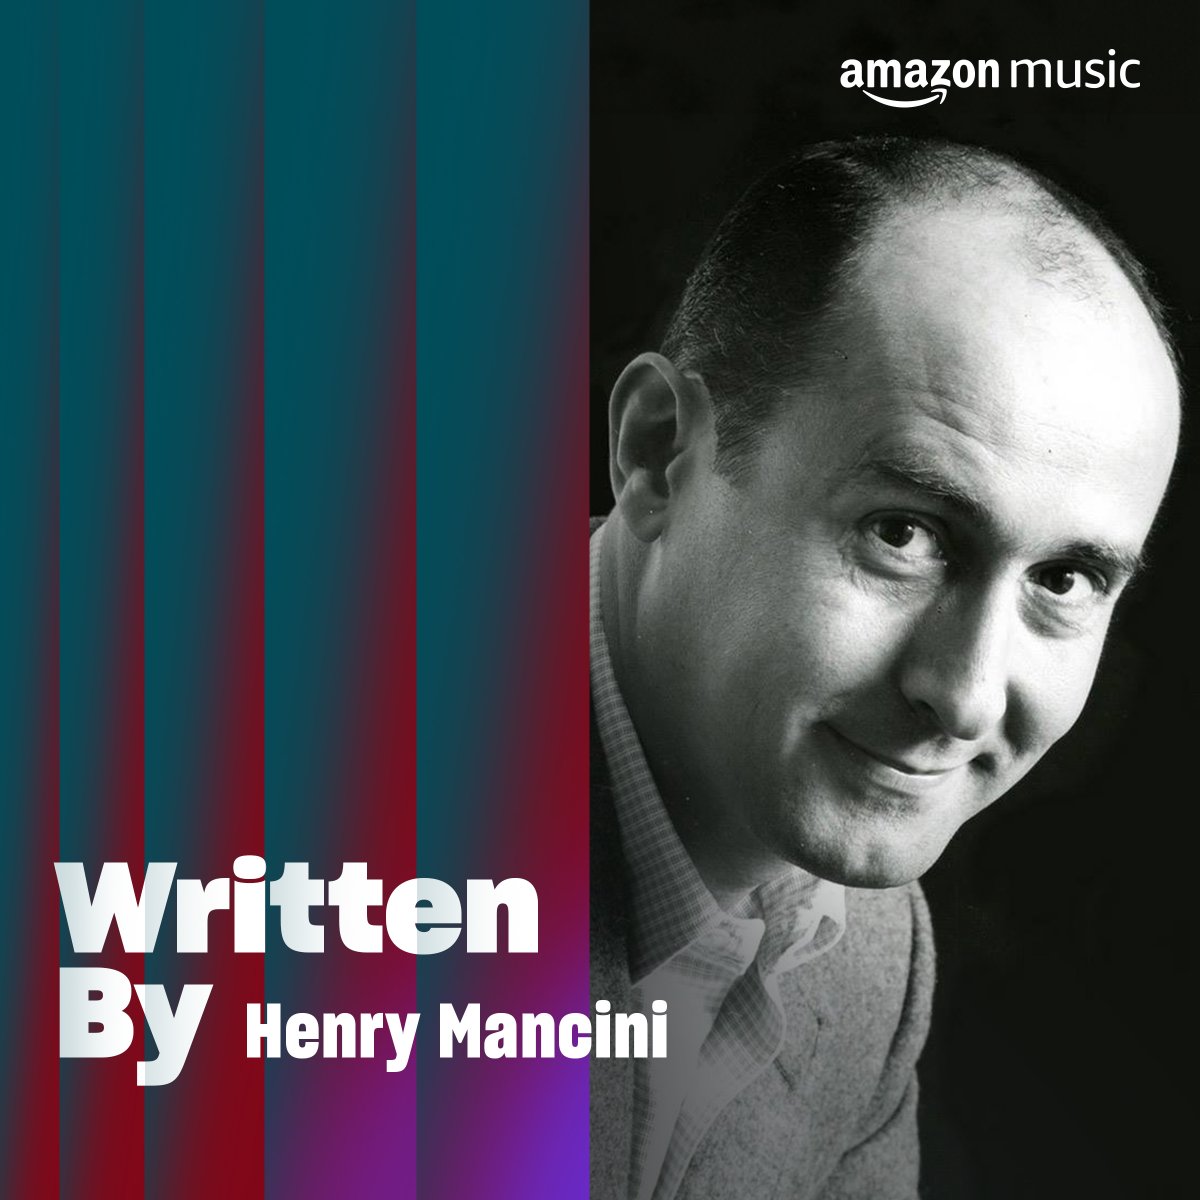 We're celebrating Hank's 100th birthday all day! Join us on @amazonmusic and stream the new WRITTEN BY HENRY MANCINI playlist, which features Henry's classic, 'Peter Gunn.' Tune in and commemorate 100 years of musical genius here: found.ee/WrittenByHenry… 🎉🎶